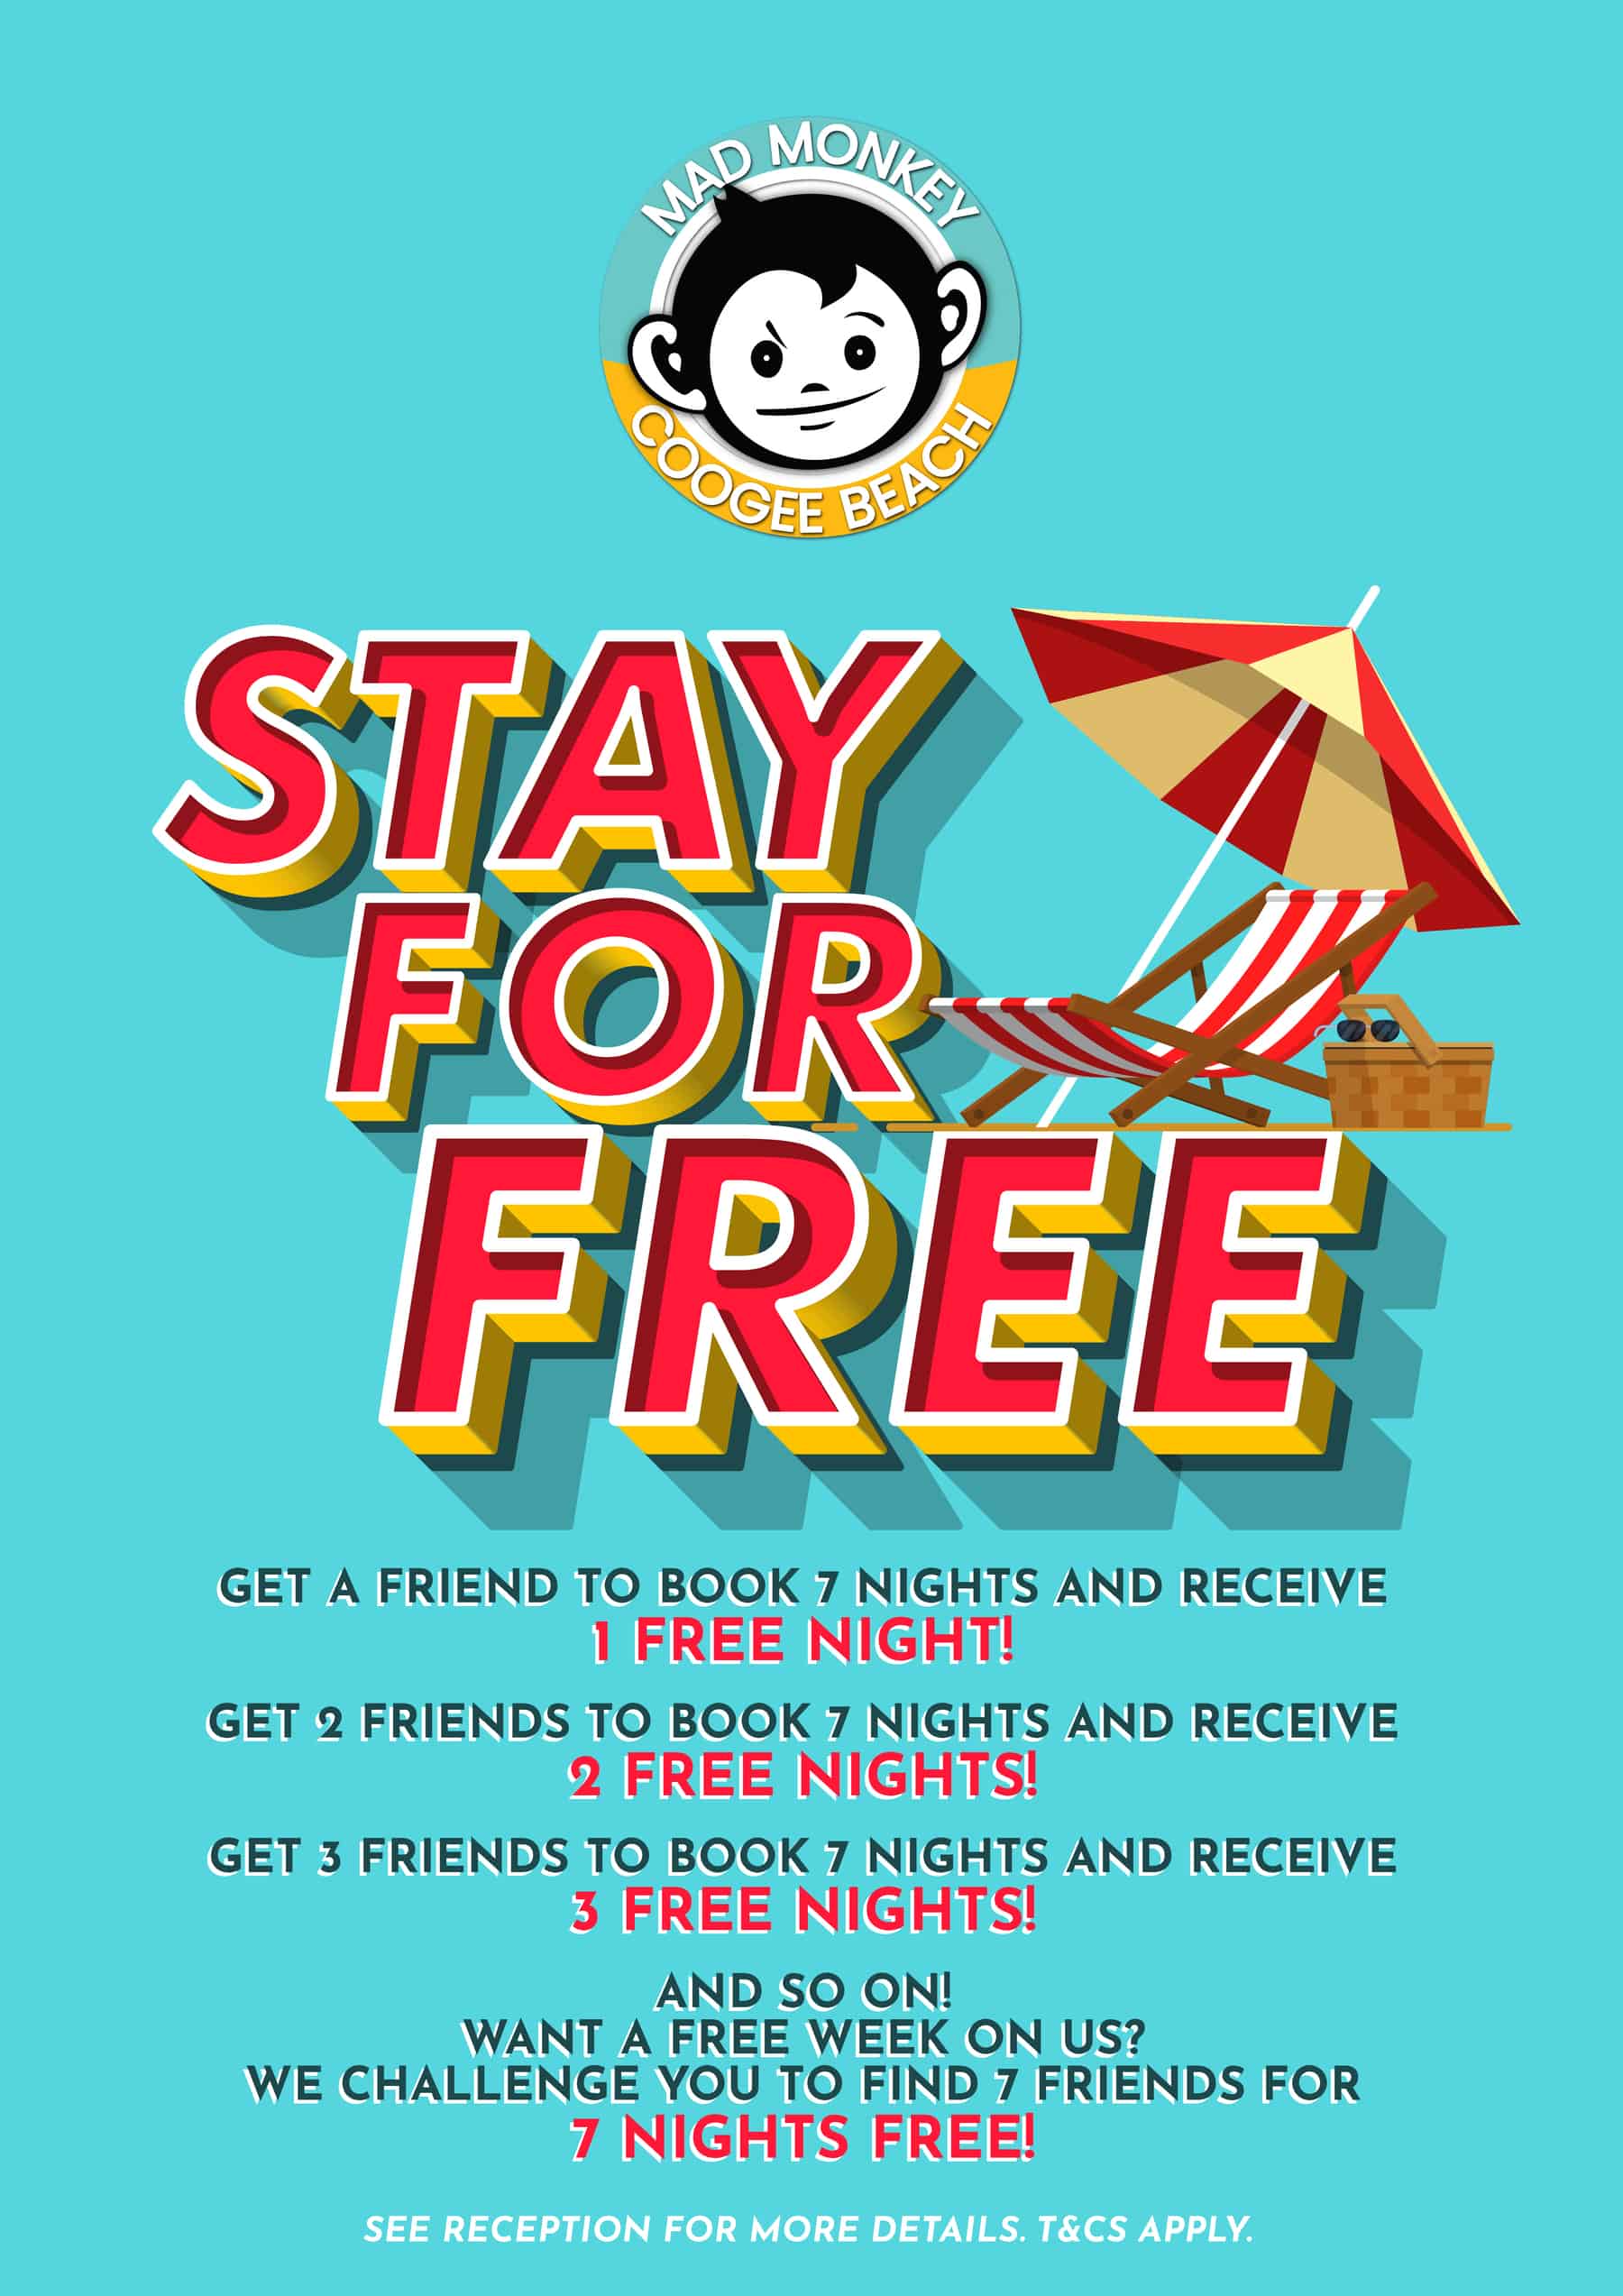 Invite Your Friends and Stay for FREE - Winter Promotions and Discounts at Mad Monkey Coogee Beach